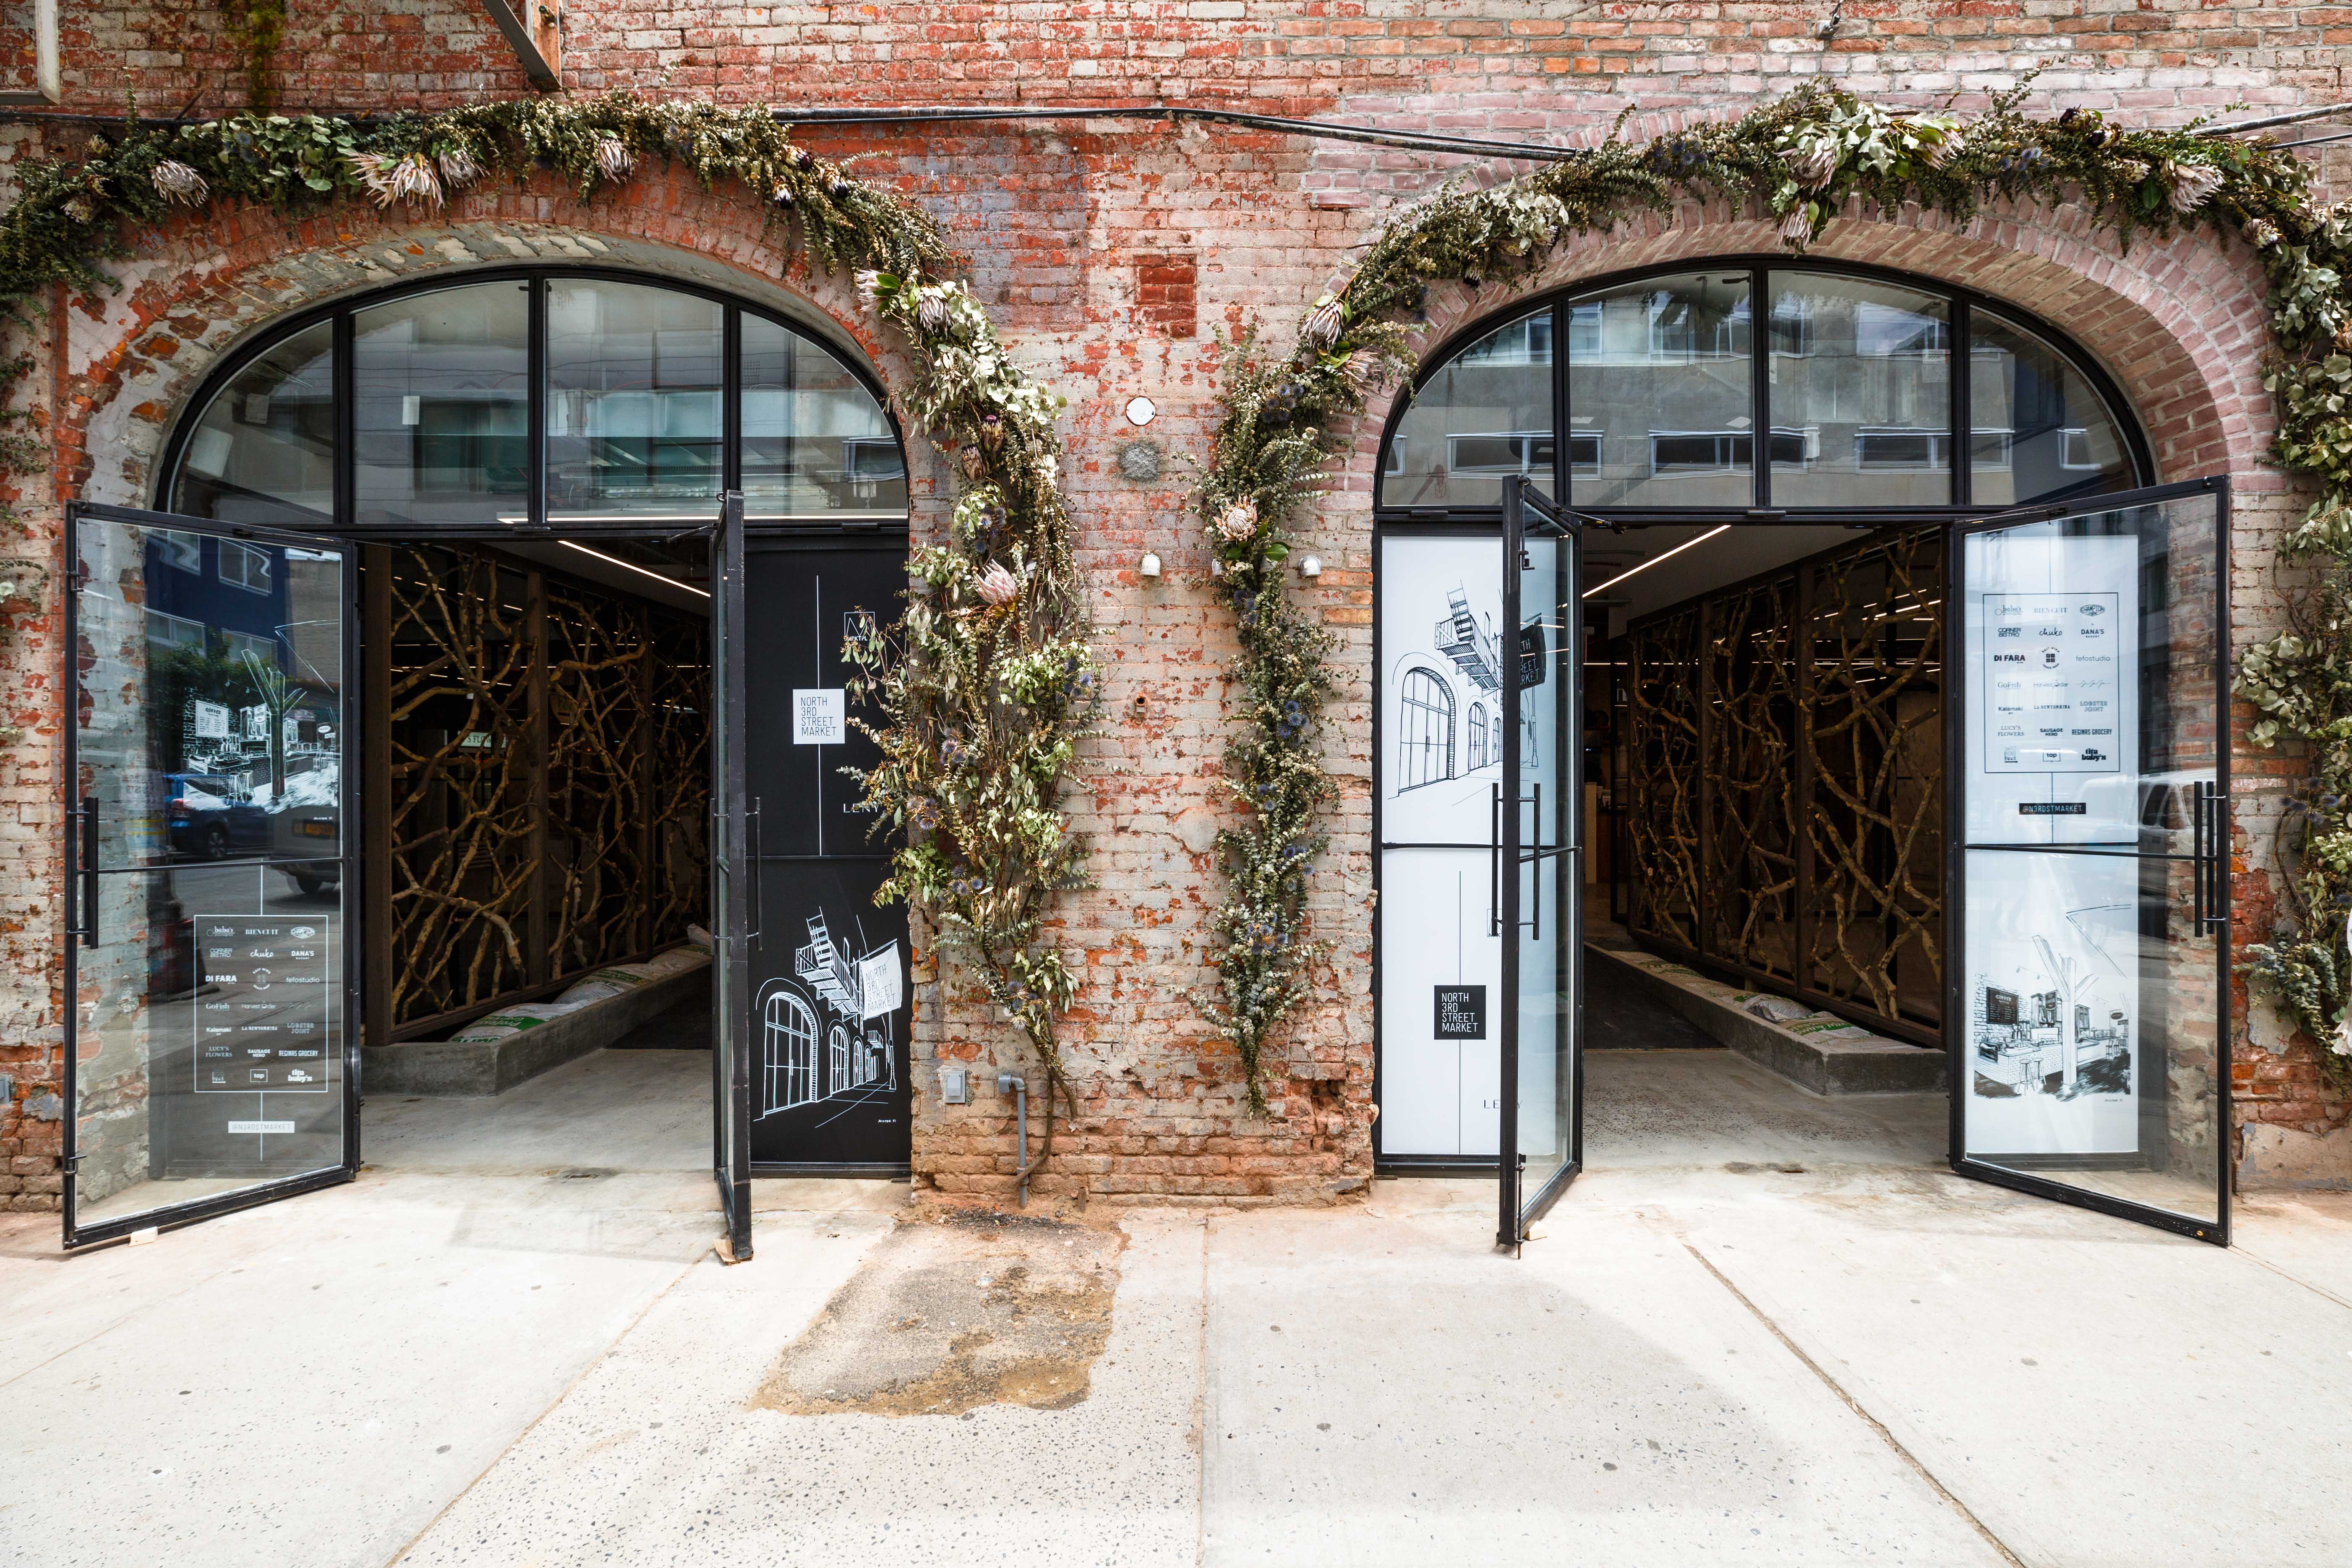 Two sets of doors open into a dimly lit food hall in Williamsburg, Brooklyn.